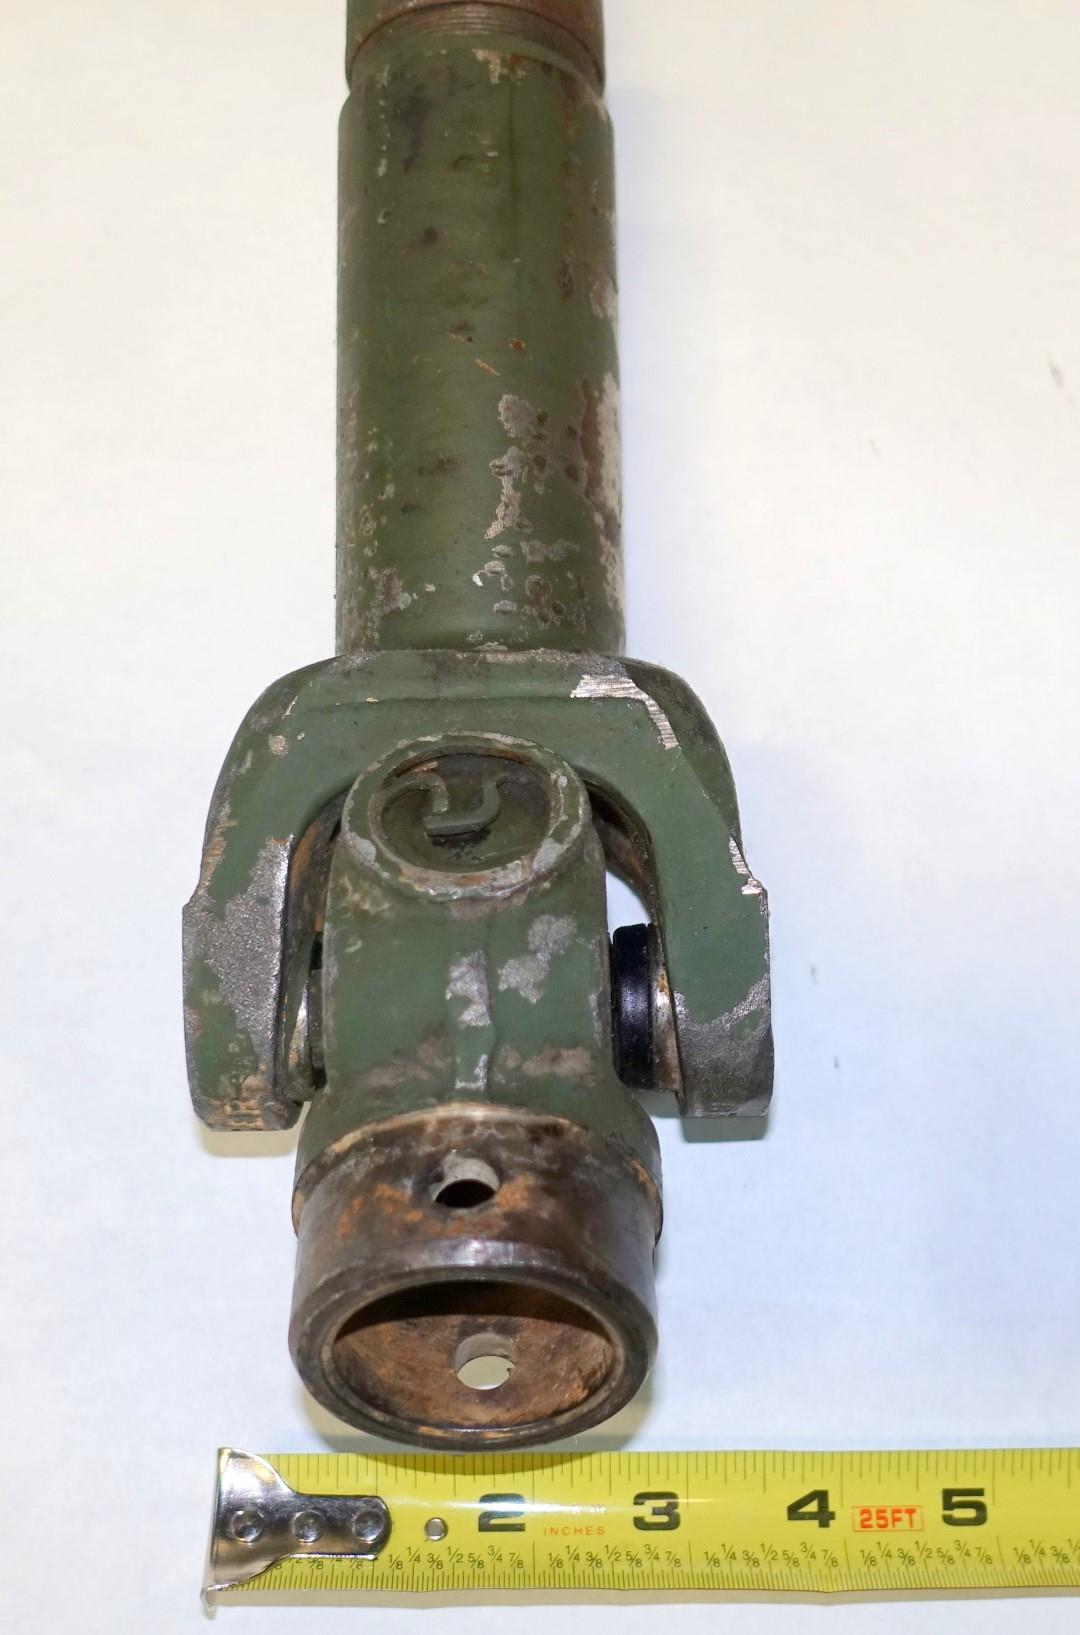 5T-949 | 2520-01-228-9400 Front Winch Drive Shaft for M809 Series USED (1).JPG